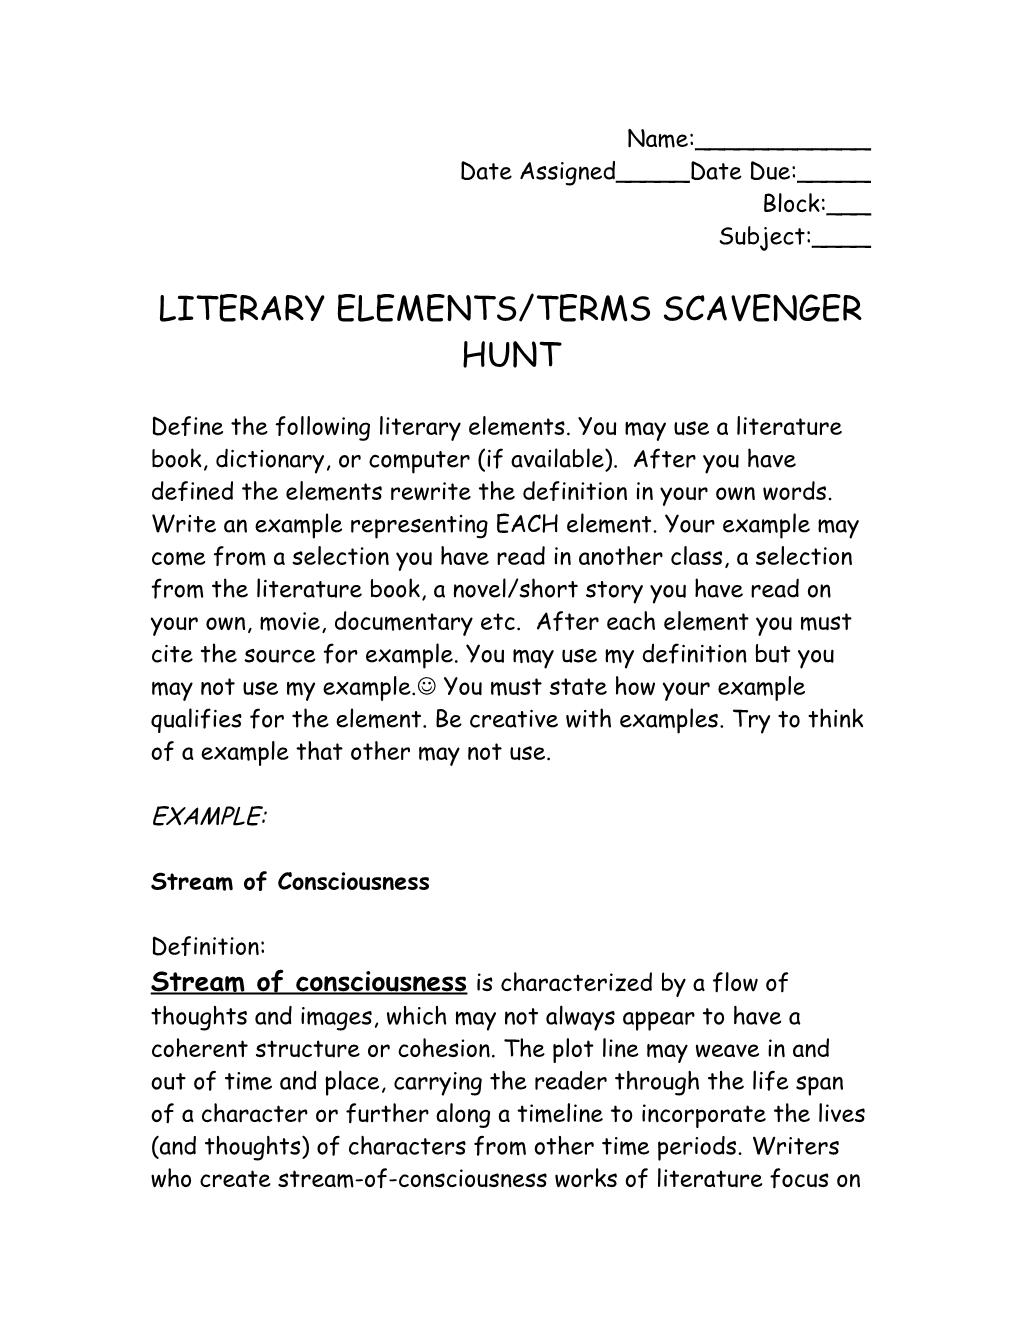 Literary Elements/Terms Scavenger Hunt